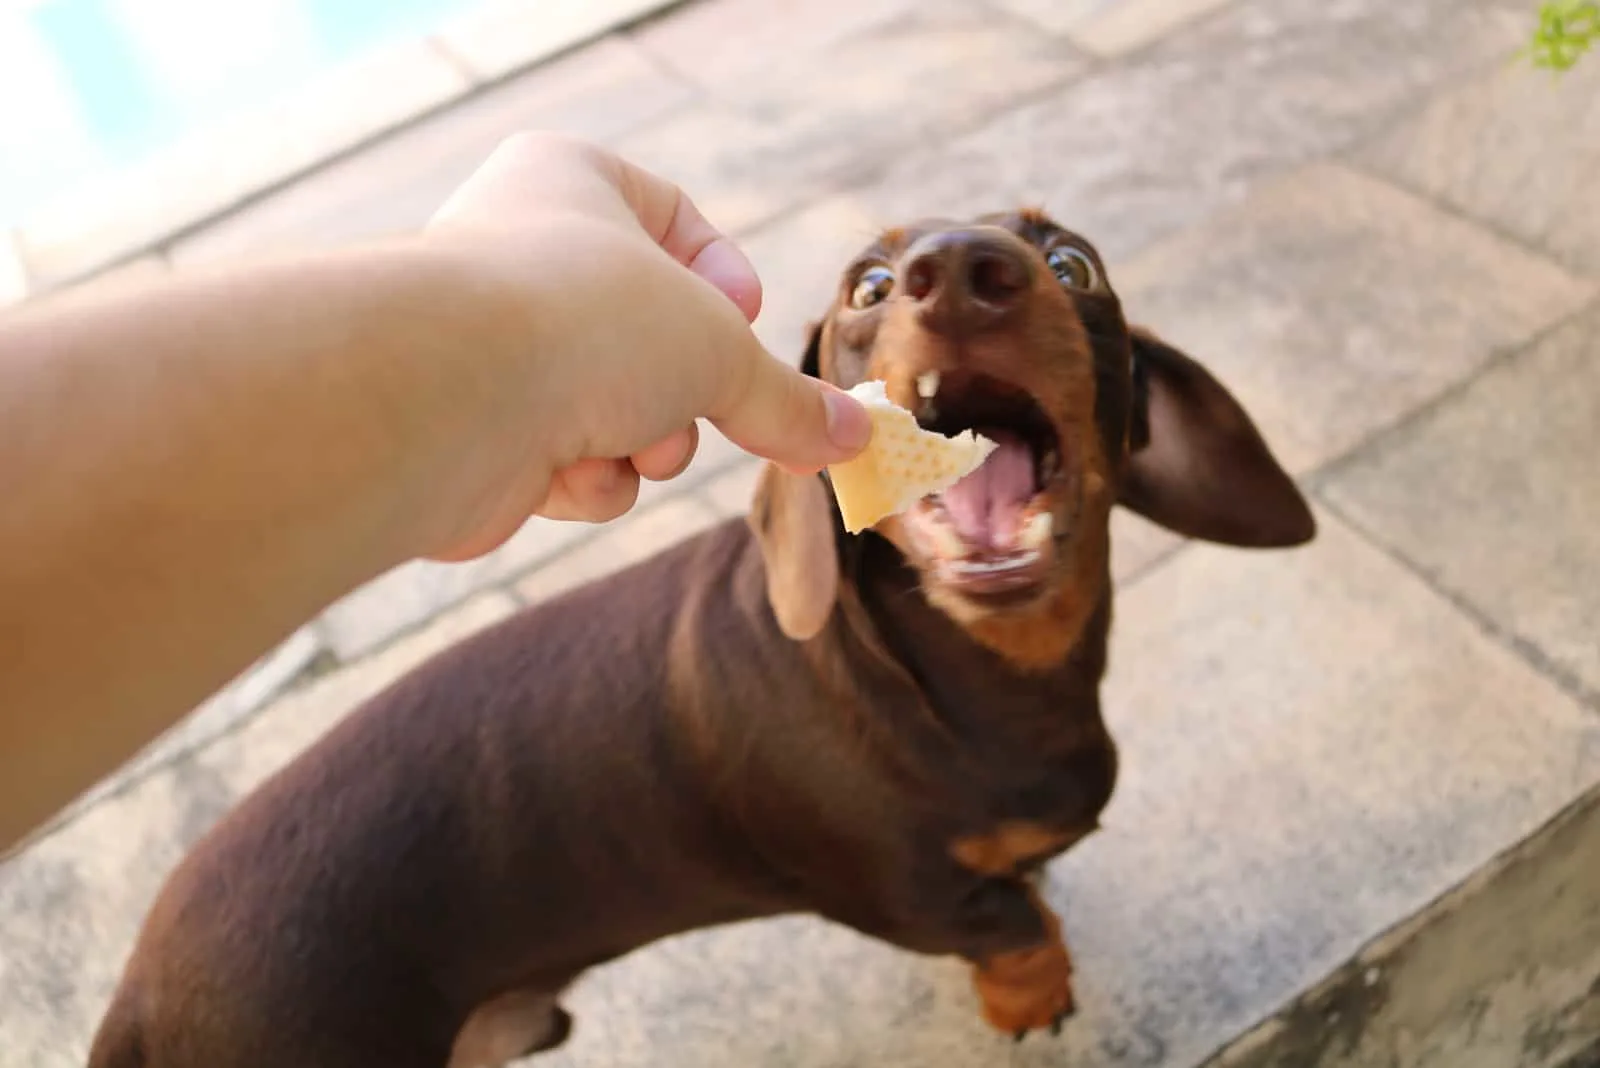 man gives dog a piece of bread